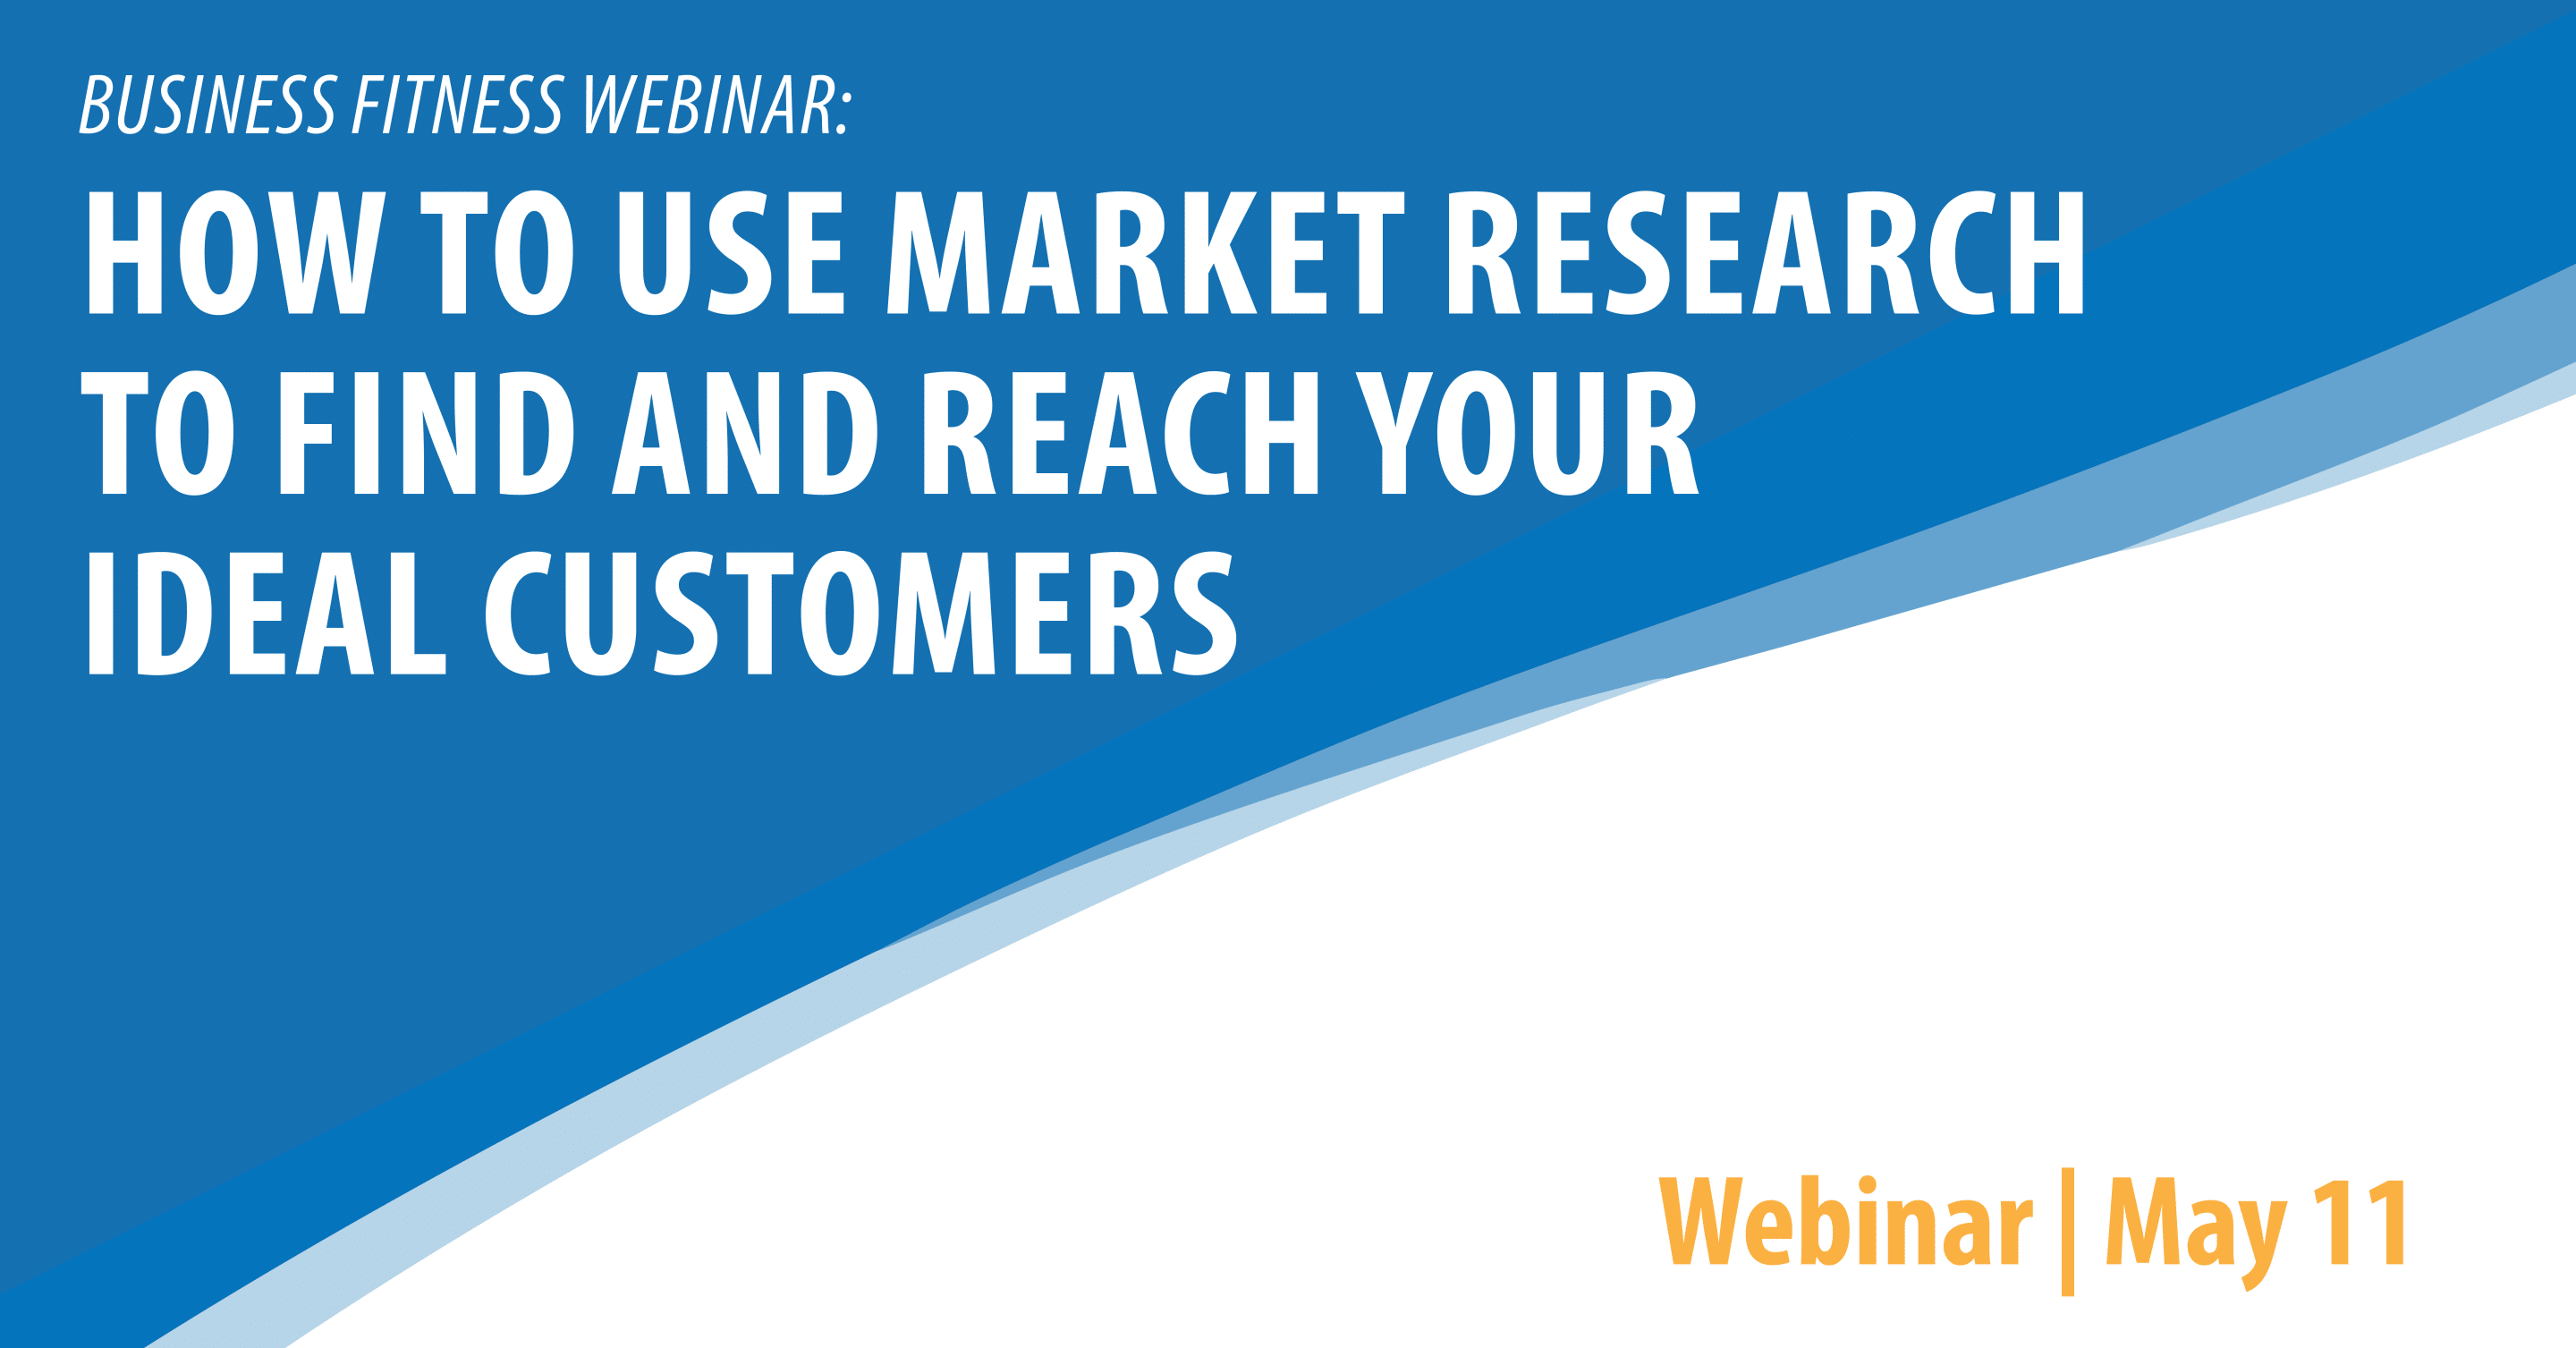 How to Use Market Research To Find and Reach Your Ideal Customers